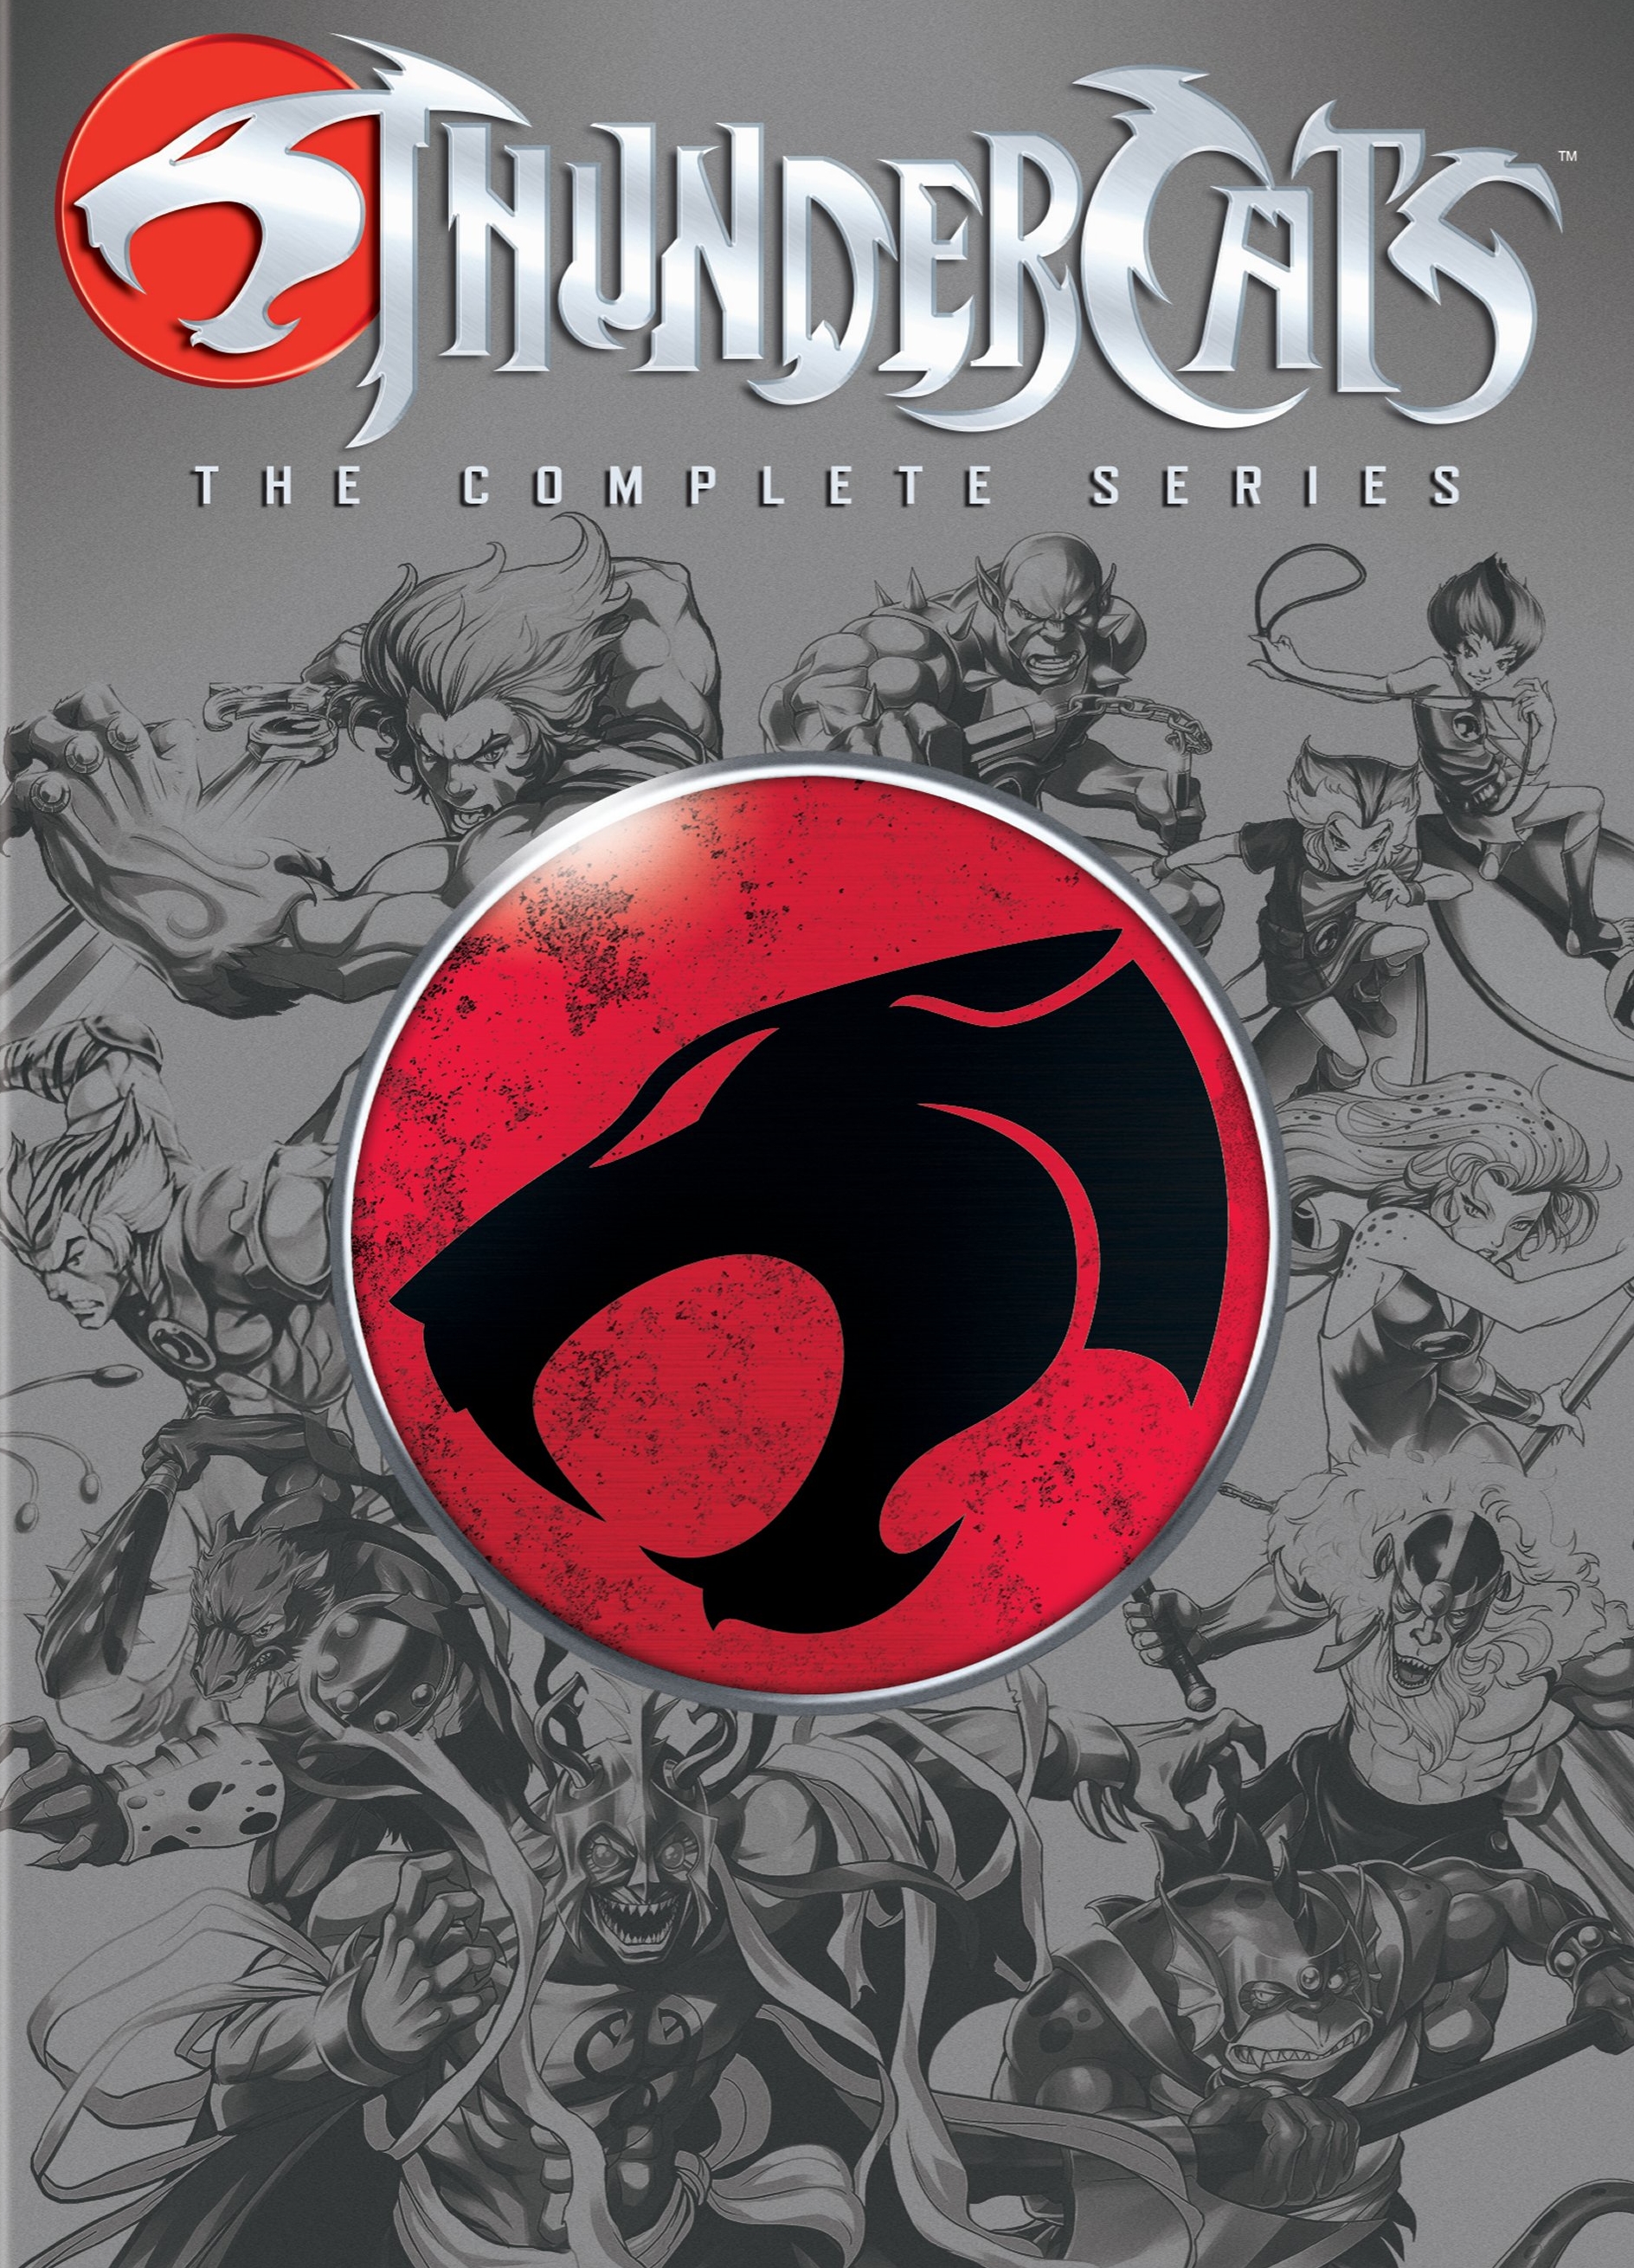 Thundercats dvd complete series